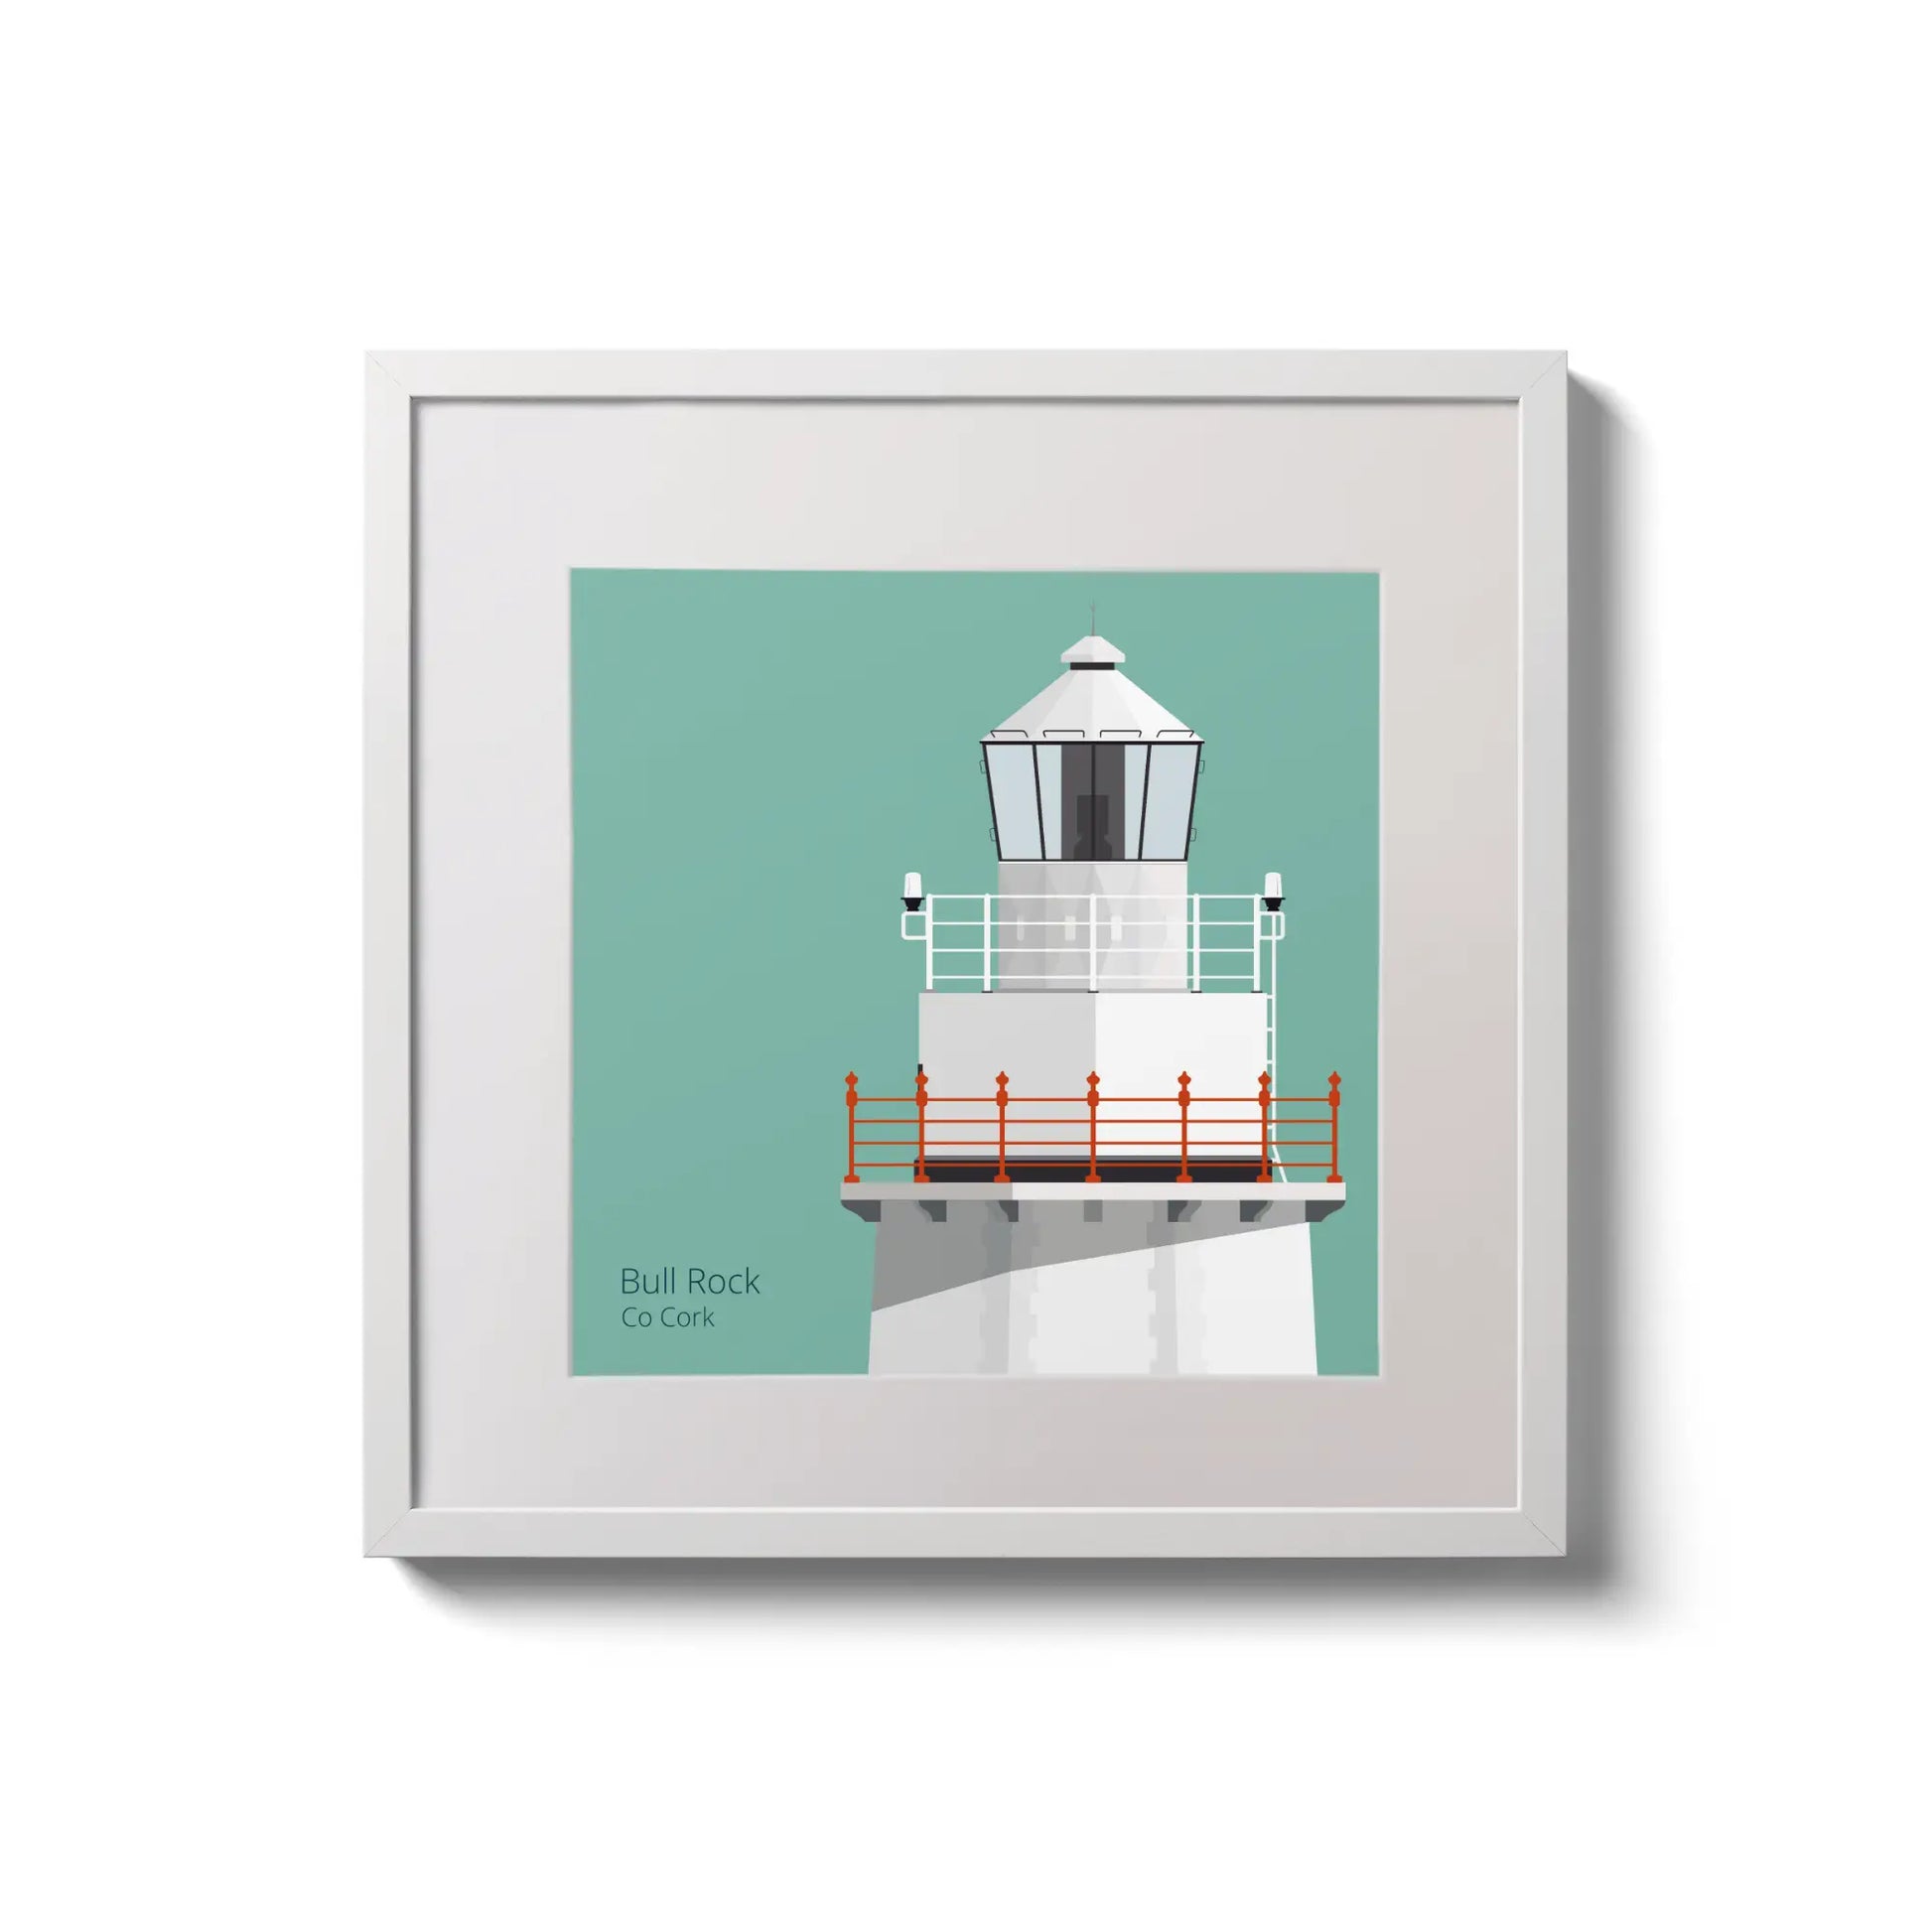 Illustration of Bull Rock lighthouse on an ocean green background,  in a white square frame measuring 20x20cm.